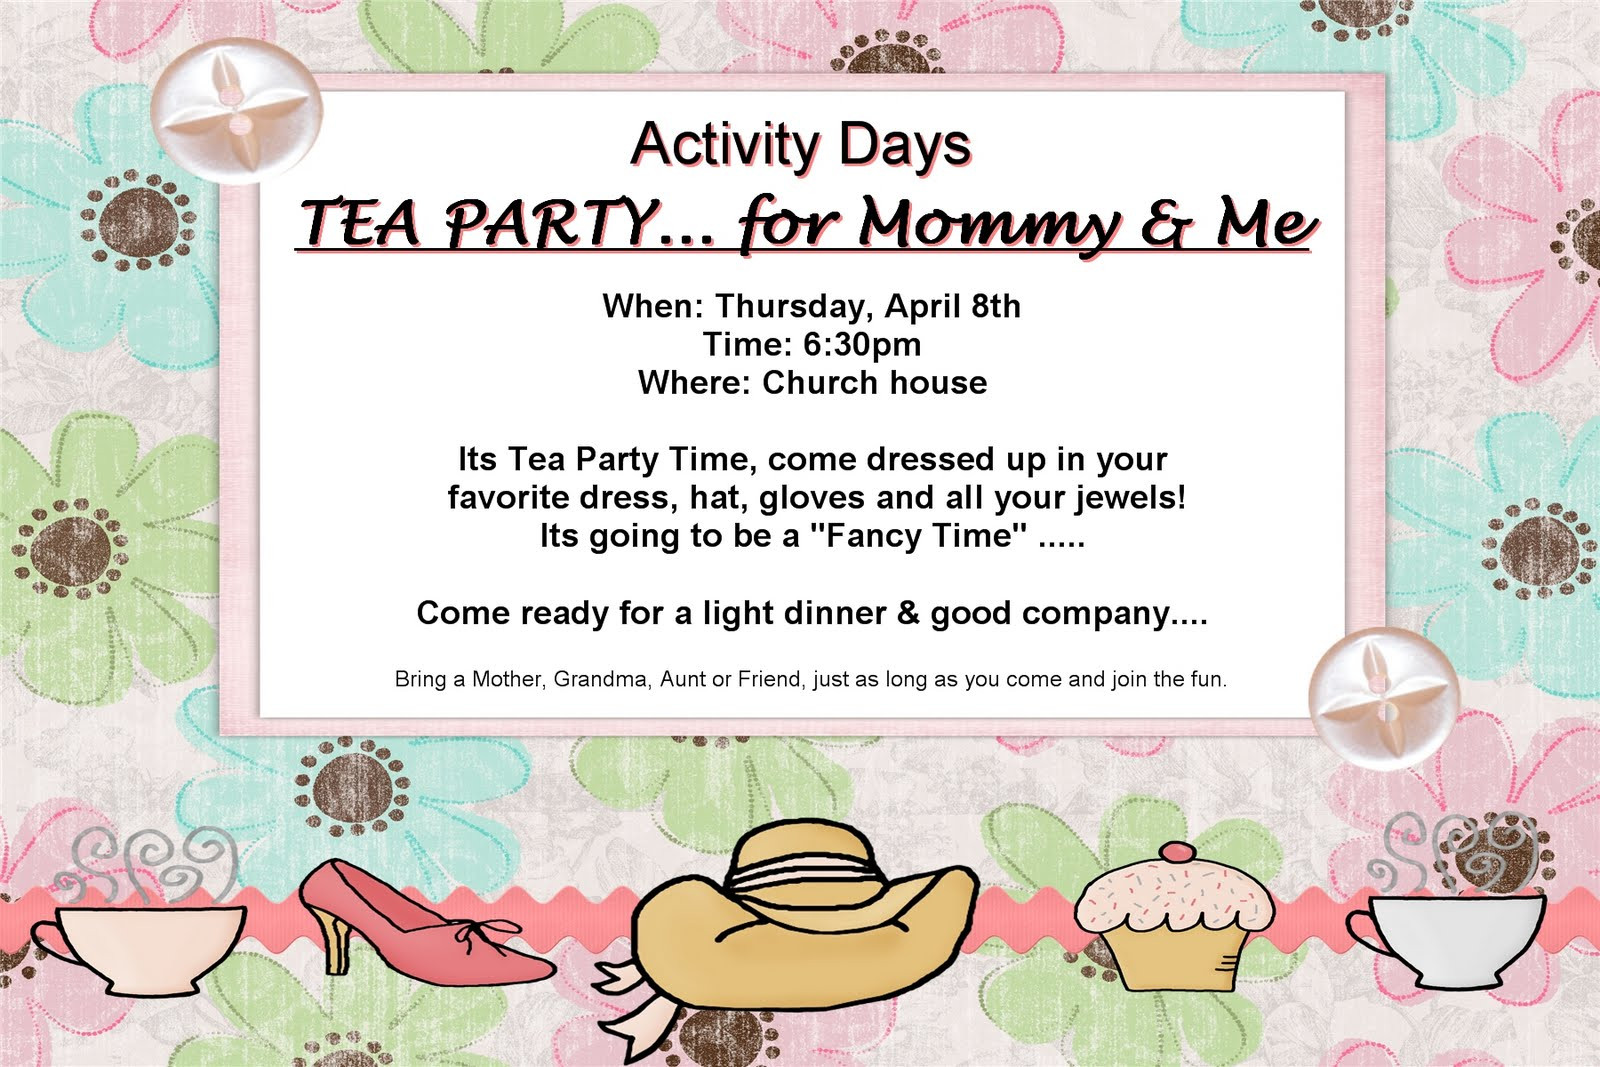 Mother Daughter Tea Party Ideas Church
 LDS Activity Day Ideas Its a Tea Party Mommy and Me